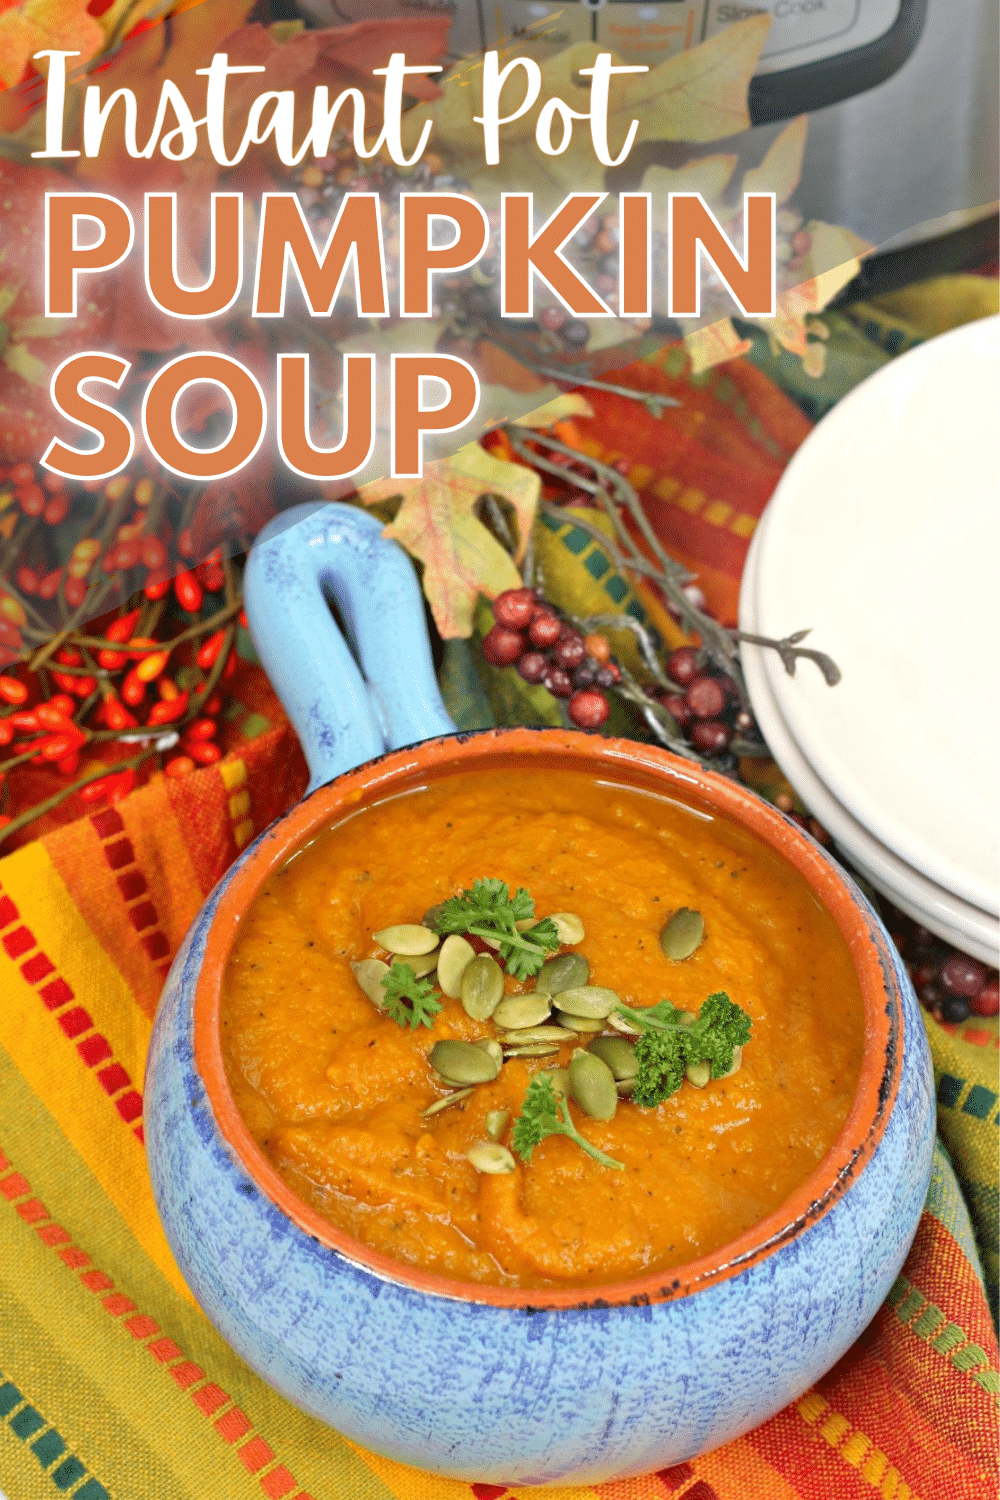 A image of Instant Pot Pumpkin Soup in a blue ceramic bowl with orange interior with a text at the top portion of the image saying "Instant Pot Pumpkin Soup".